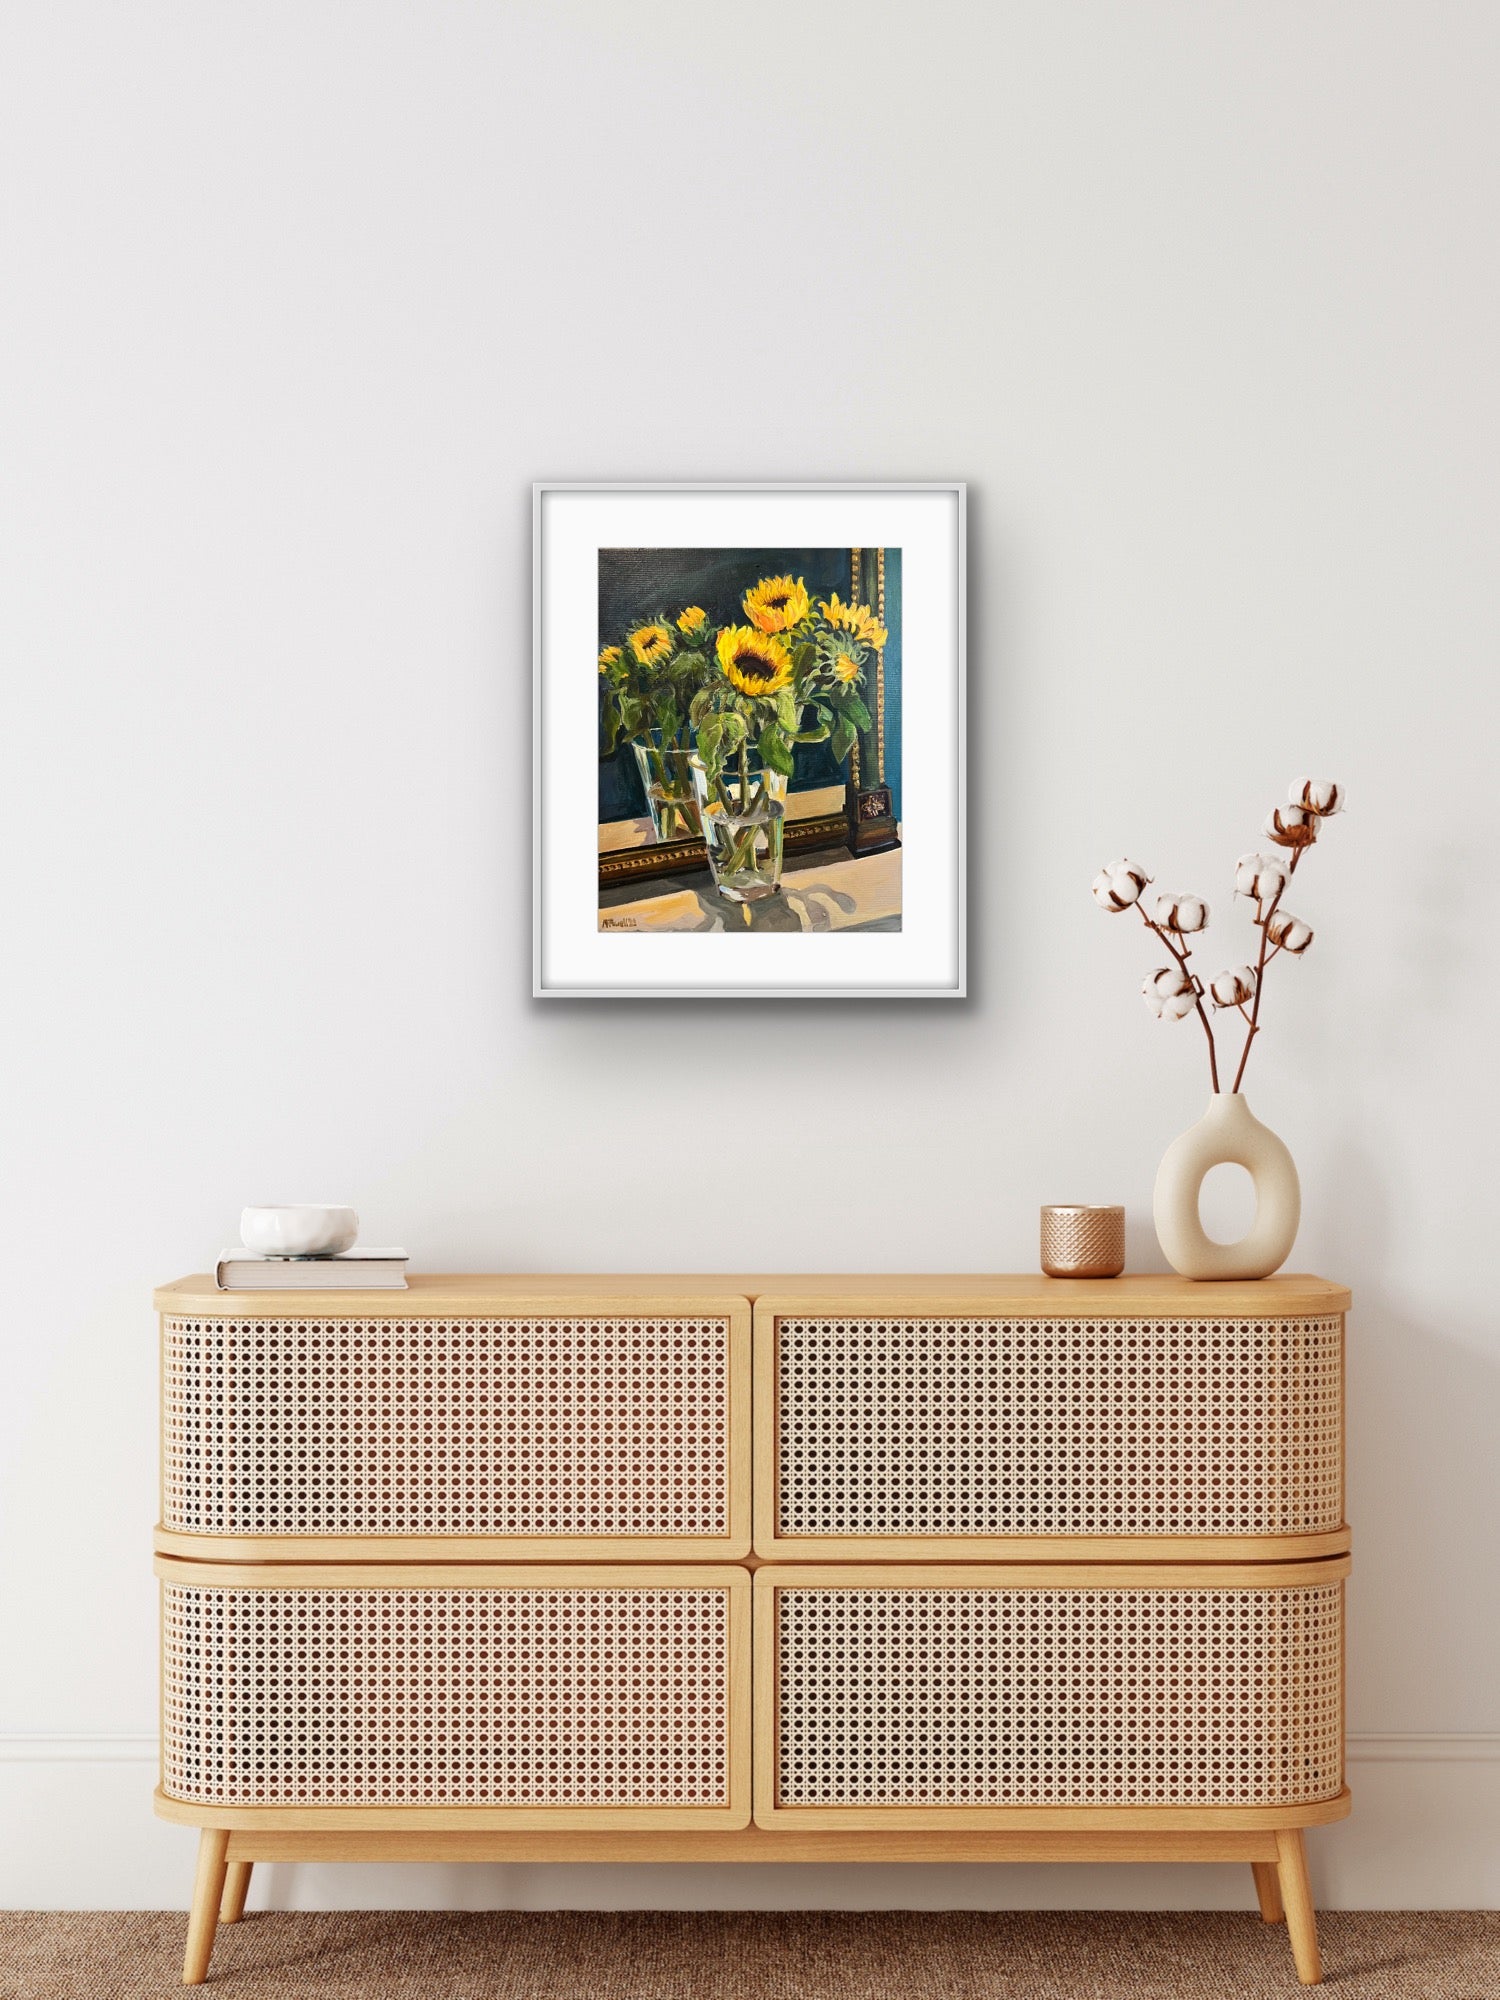 Print of a fine art painting of sunflowers displayed in a vase in front of a vintage mirror. Print framed in a white frame and displayed on a white wall above a beige wood cabinet. 